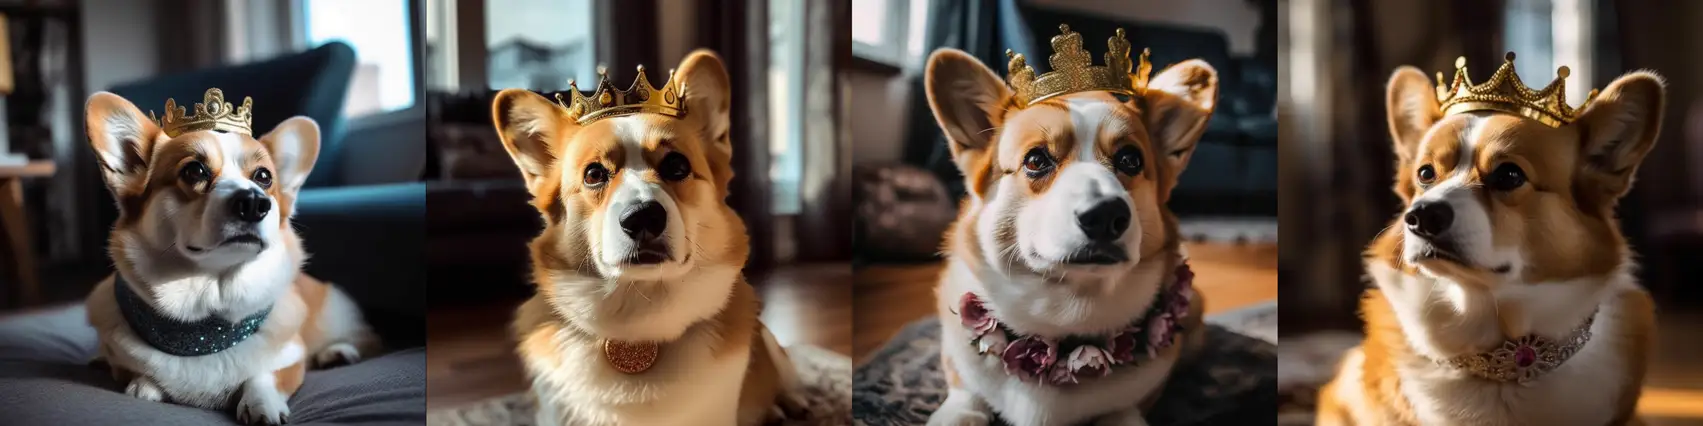 image of corgi's wearing crowns generated by AI